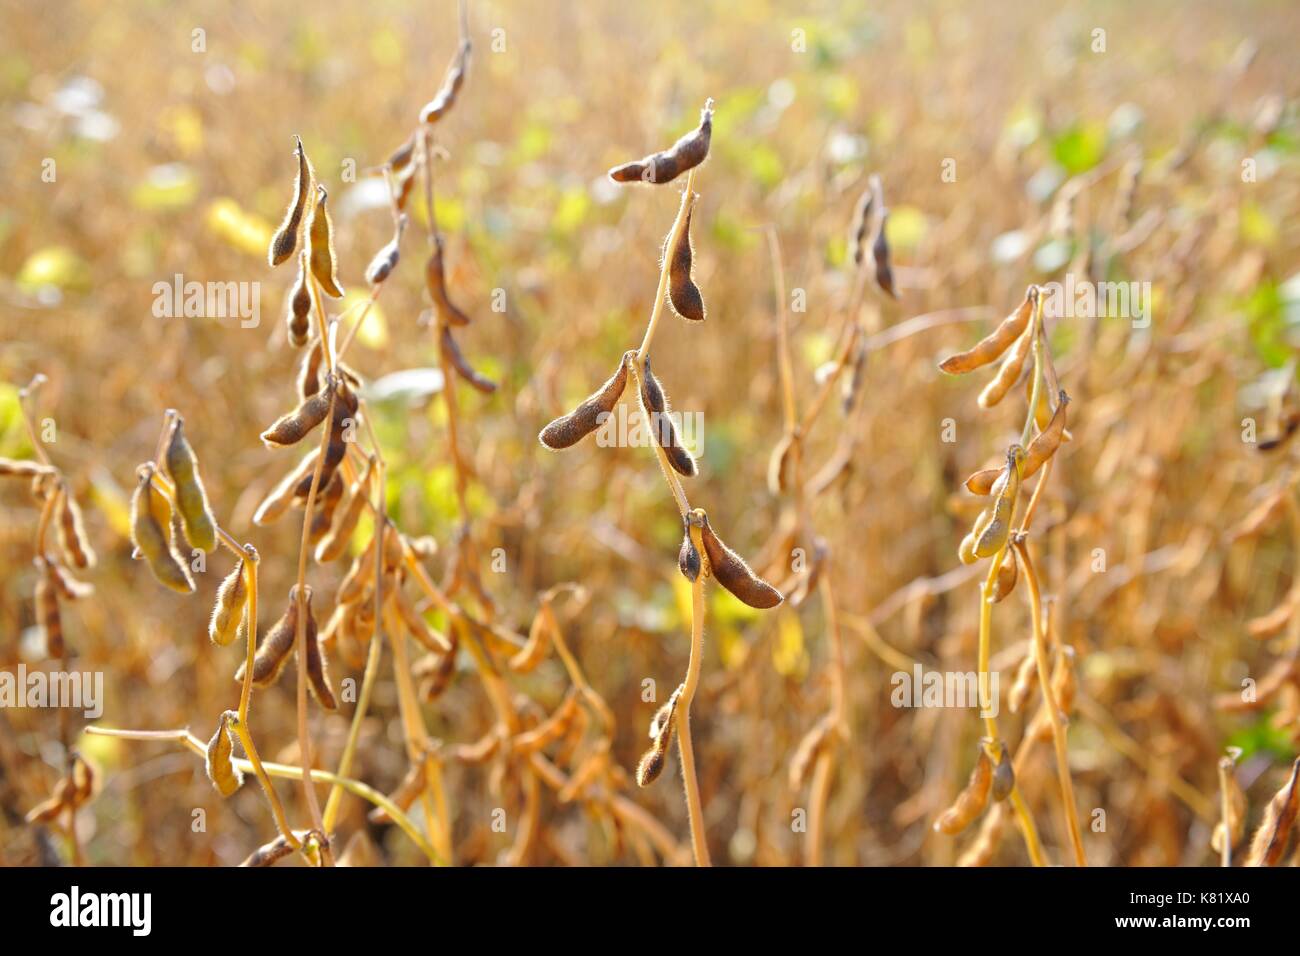 Soya beans (Glycine max) with ripe pods, Baden-Württemberg, Germany Stock Photo